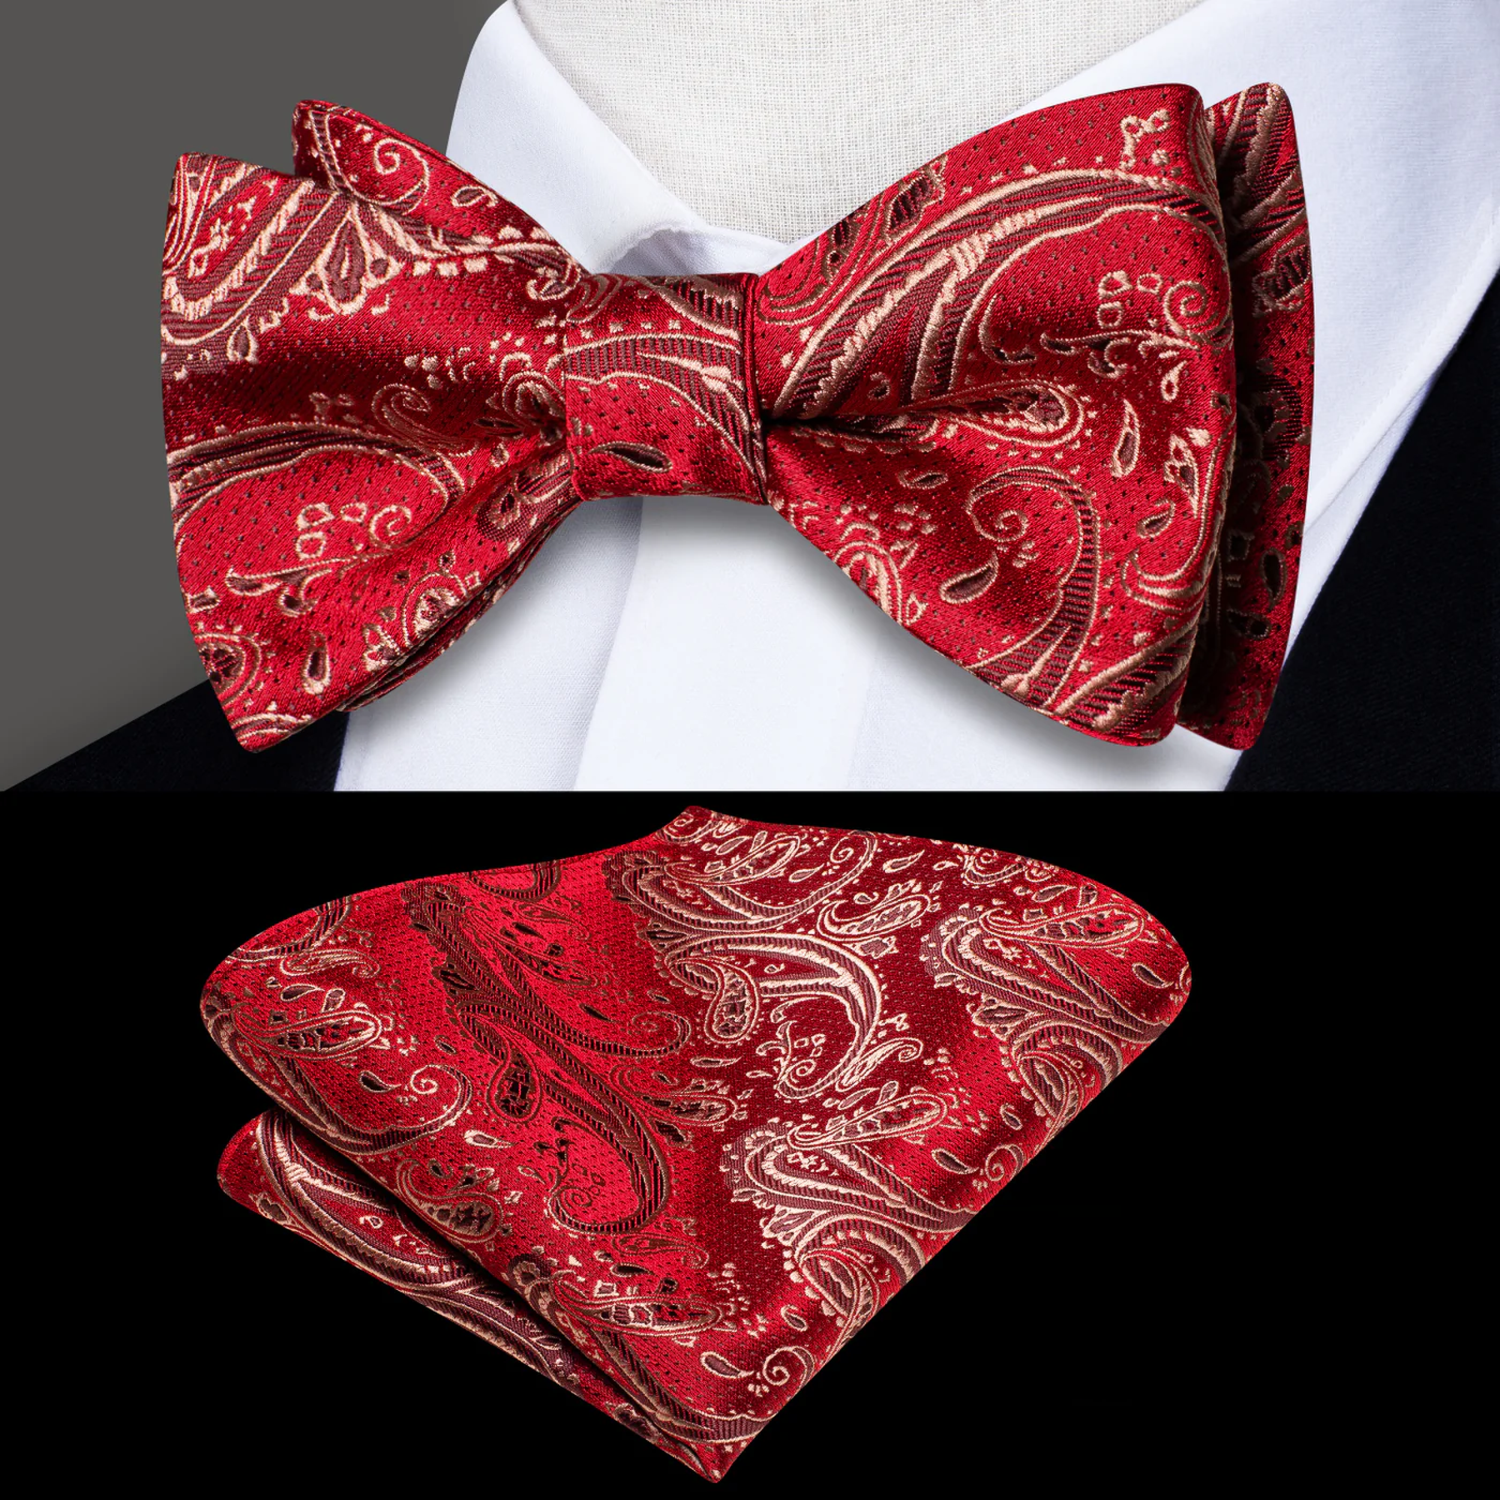 A Red, Gold Paisley Pattern Silk Self Tie Bow Tie, Matching Pocket Square||Red, Gold